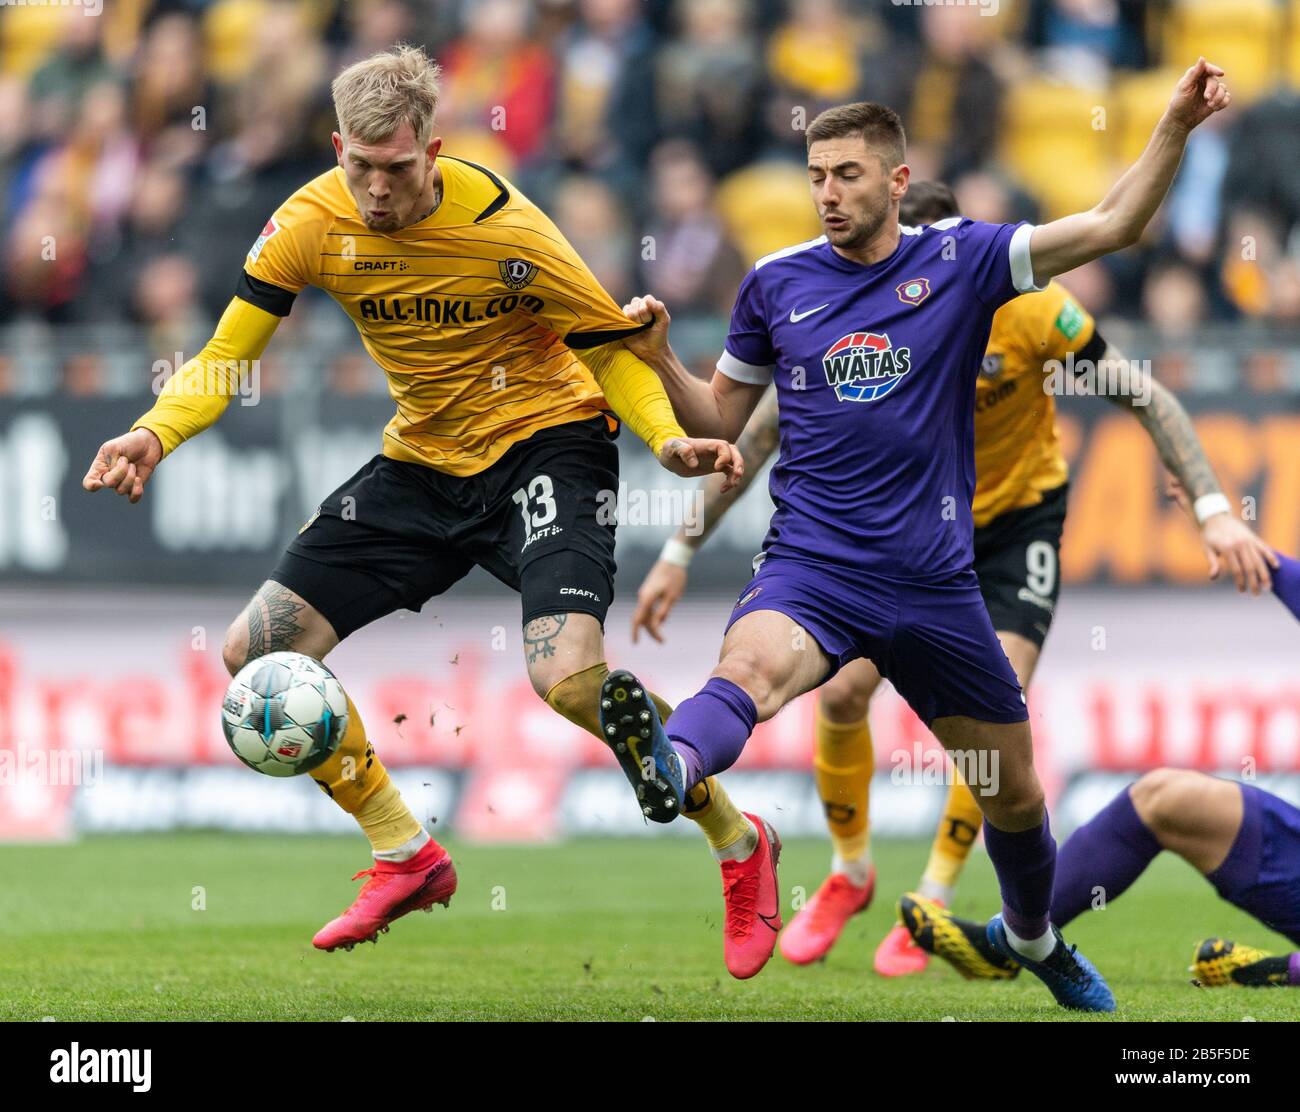 Dresden, Germany. 08th Mar, 2020. Football: 2nd Bundesliga, SG Dynamo Dresden - FC Erzgebirge Aue, 25th matchday, at the Rudolf Harbig Stadium. Dynamos Simon Makienok (l) against Aues Marko Mihojevic. Credit: Robert Michael/dpa-Zentralbild/dpa - IMPORTANT NOTE: In accordance with the regulations of the DFL Deutsche Fußball Liga and the DFB Deutscher Fußball-Bund, it is prohibited to exploit or have exploited in the stadium and/or from the game taken photographs in the form of sequence images and/or video-like photo series./dpa/Alamy Live News Stock Photo